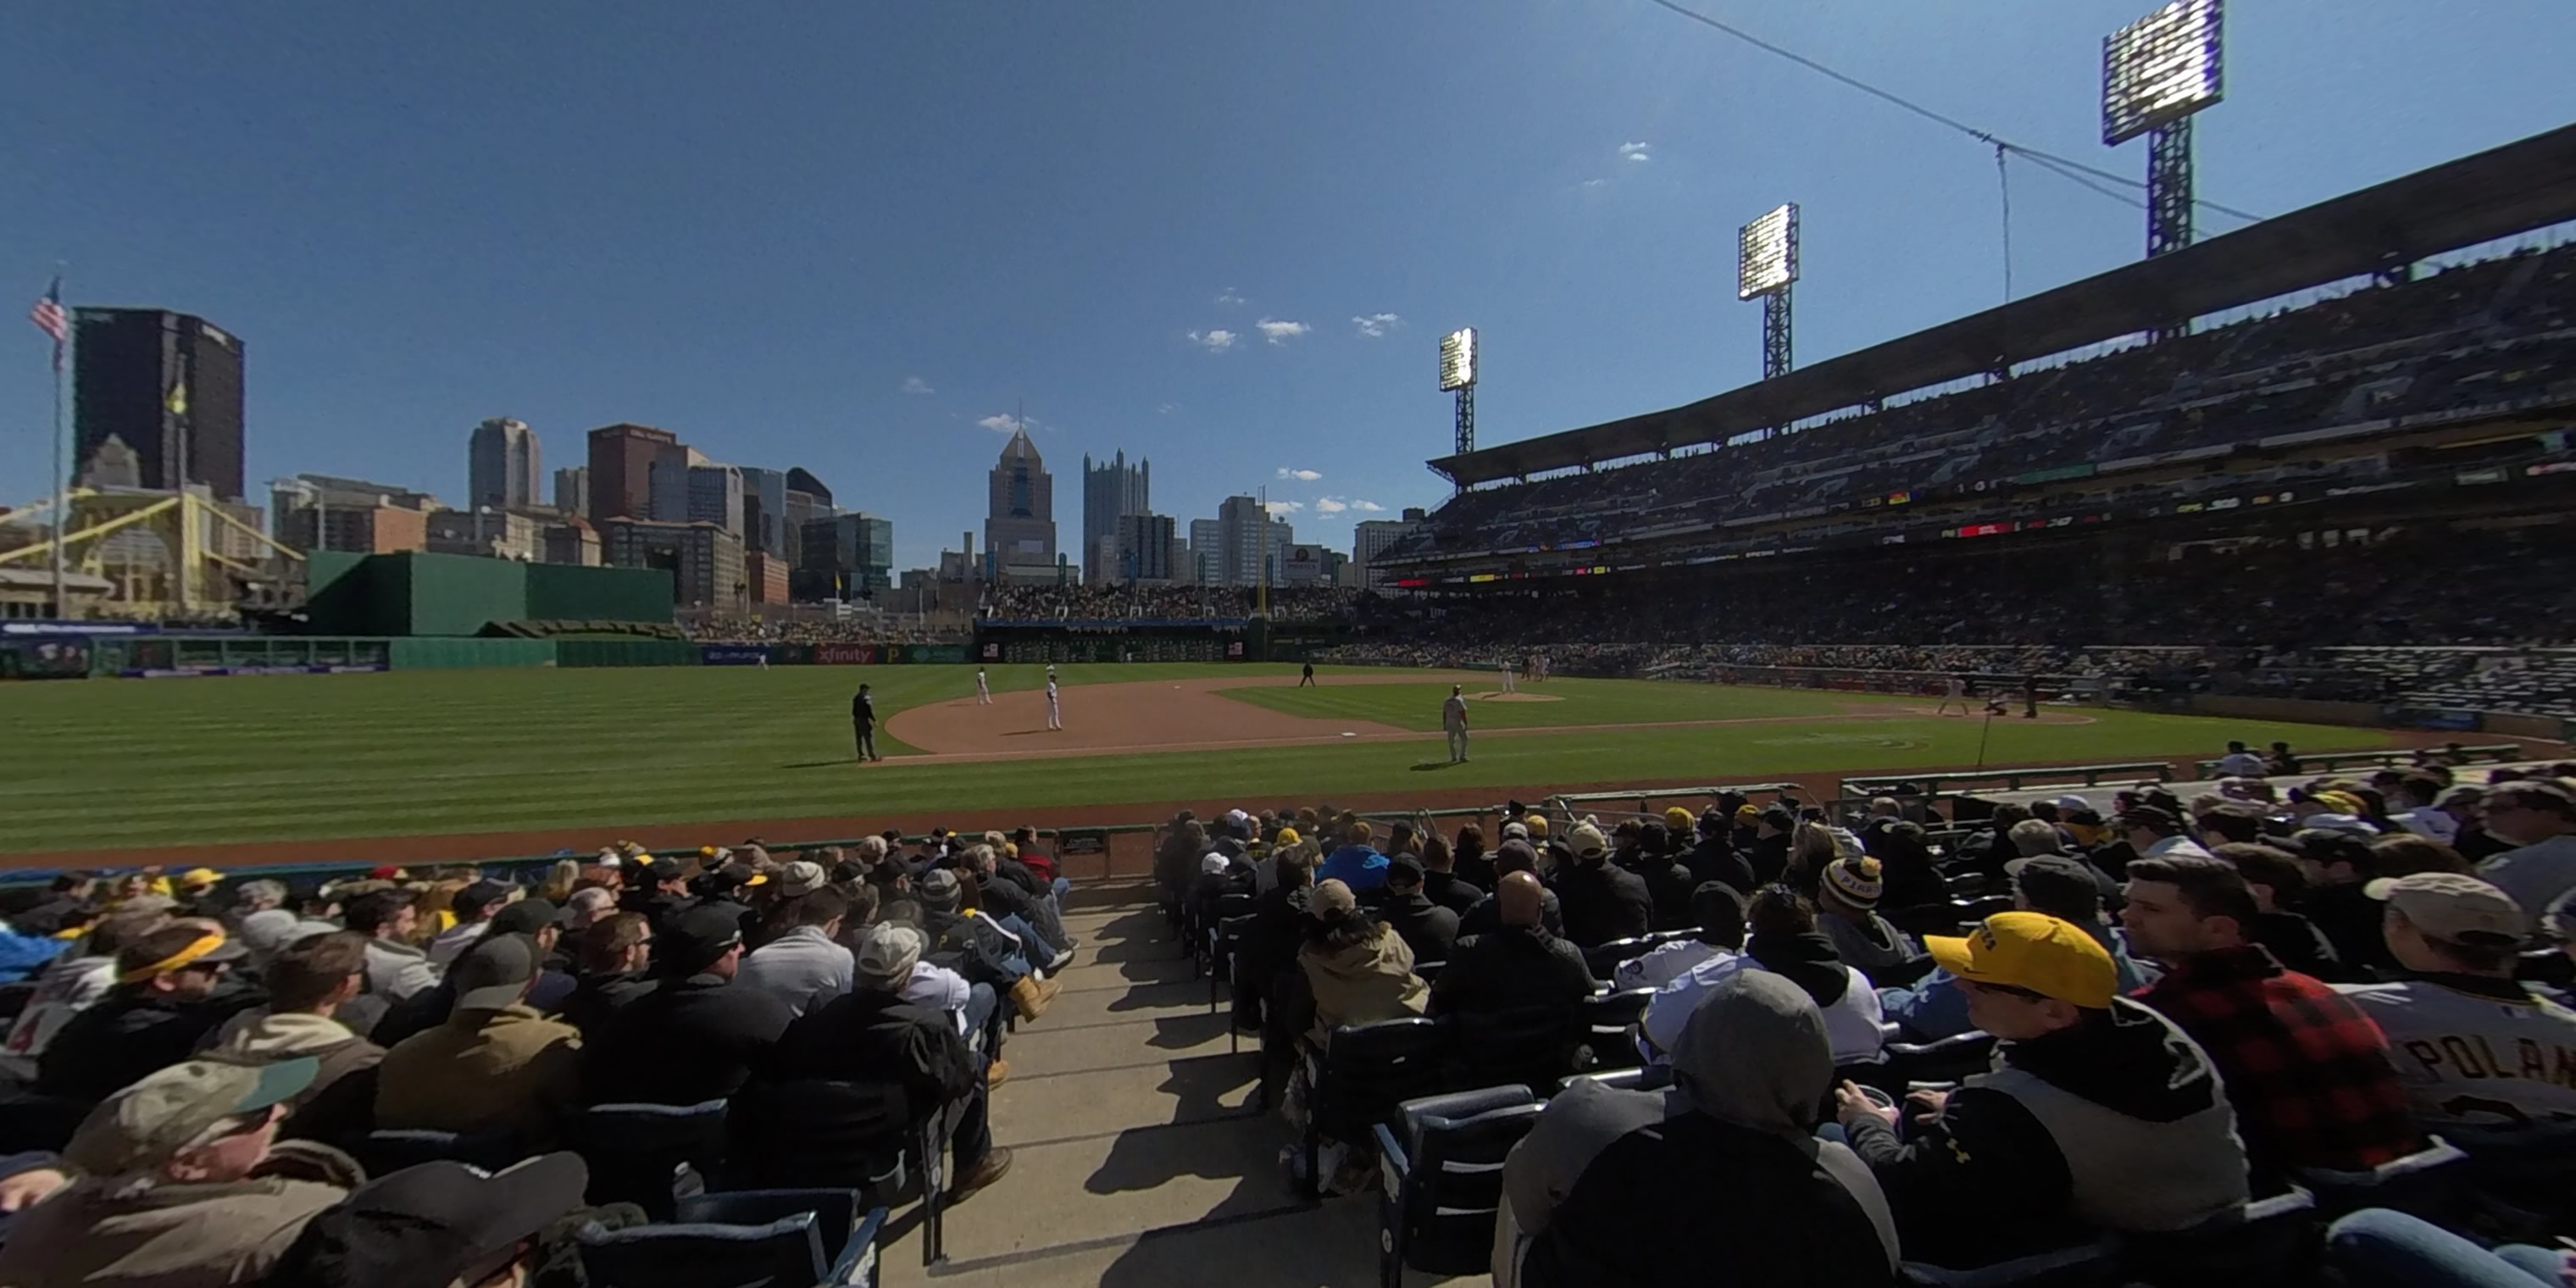 section 24 panoramic seat view  - pnc park